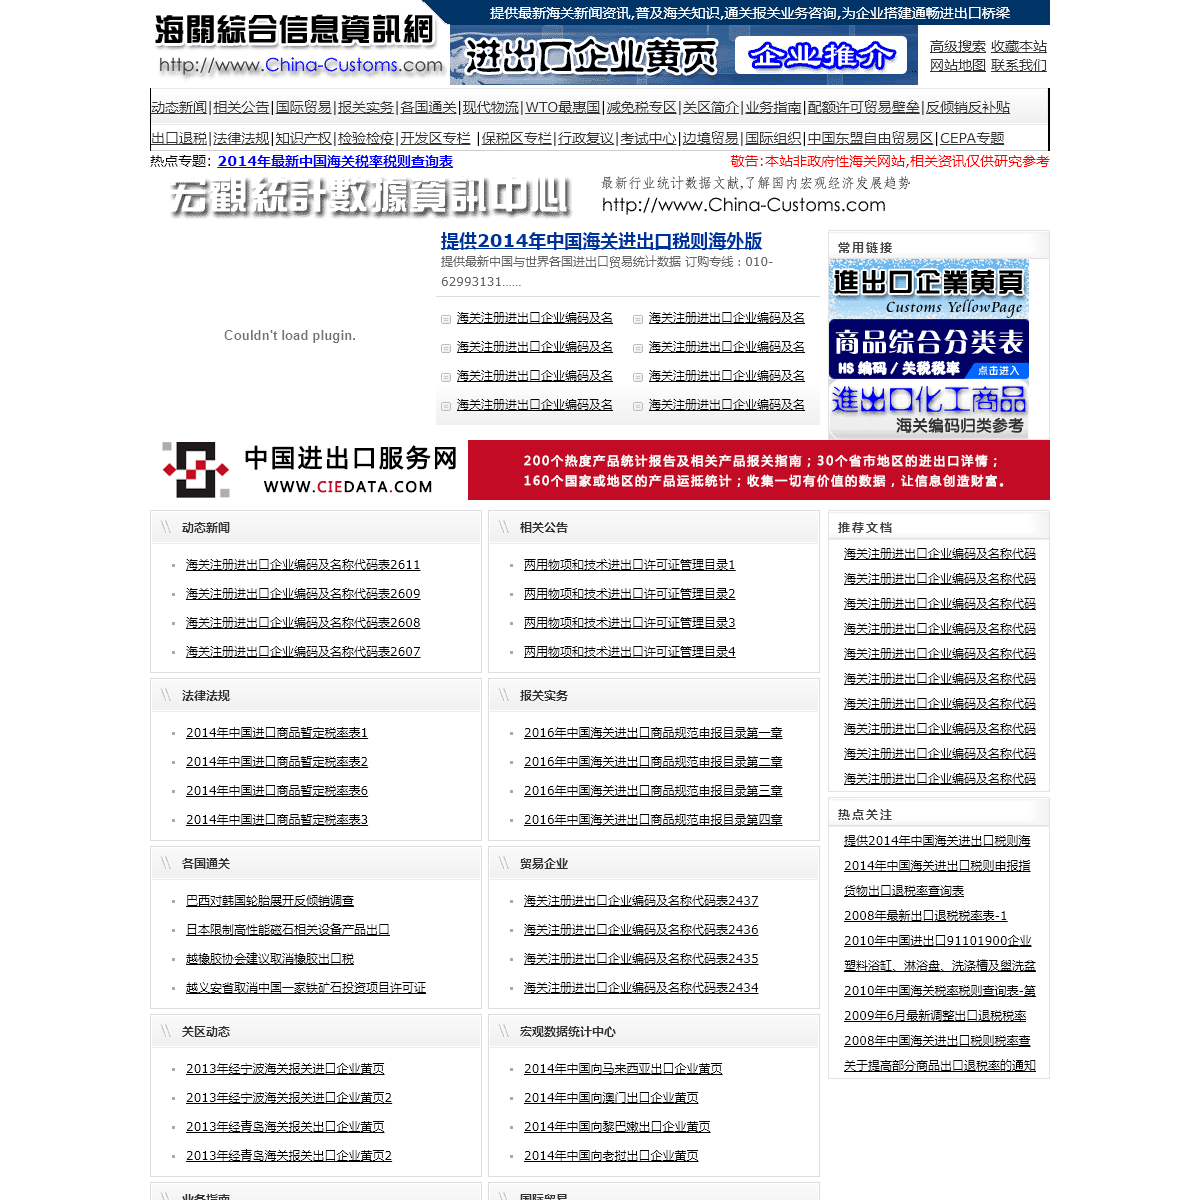 A complete backup of china-customs.com